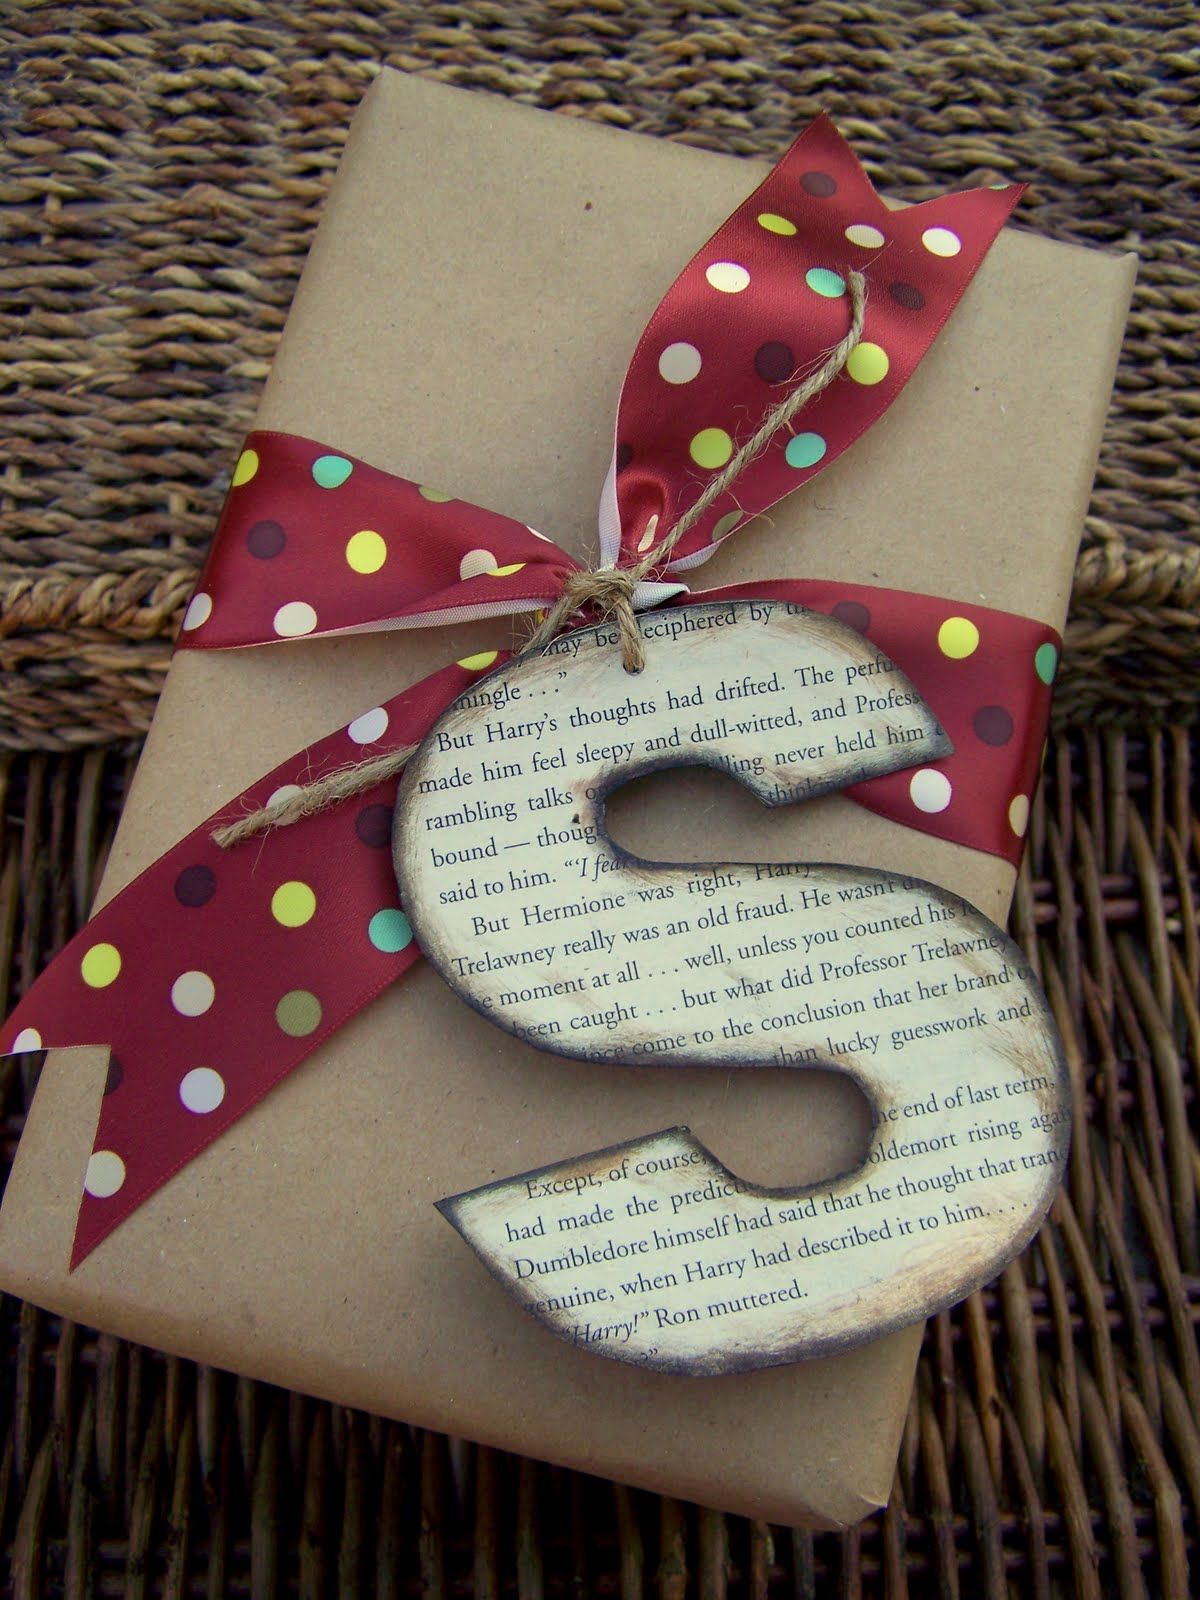 Much cuter than gift tags! This website has some awesome ideas!